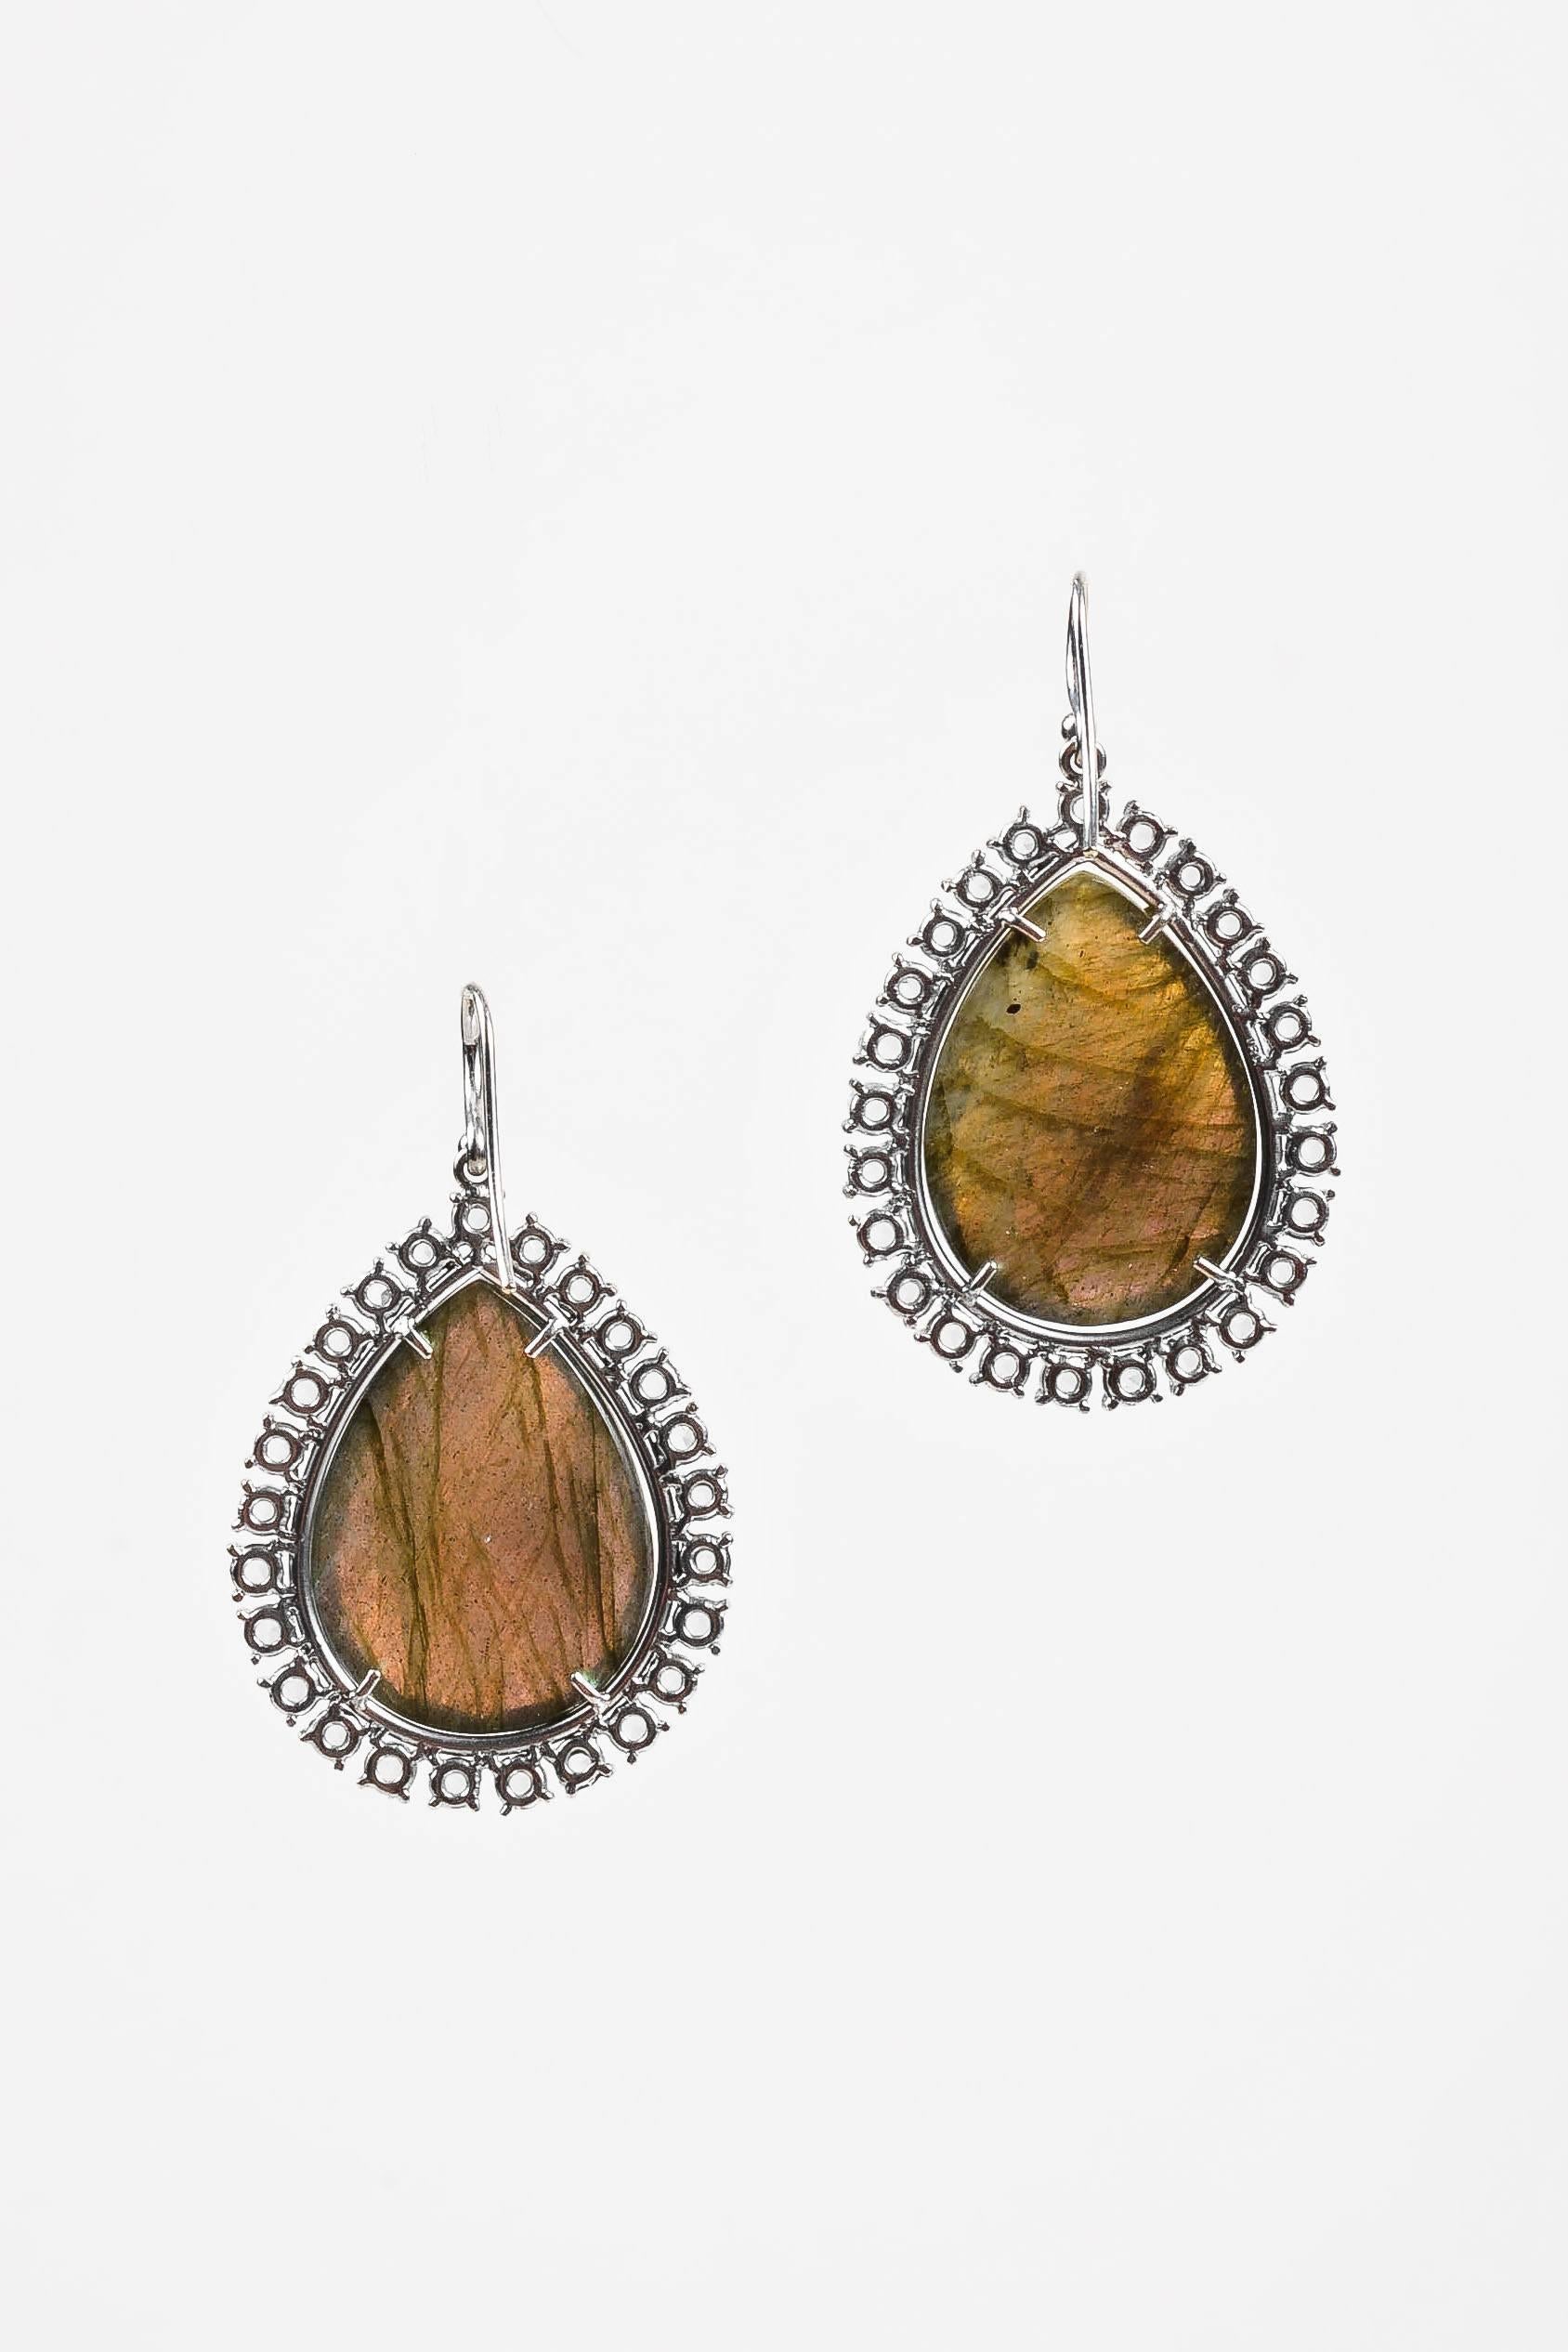 Retails at $24,140. These gorgeous drop earrings from Irene Neuwirth are constructed of a shimmering iridescent green rose-cut labradorite teardrop outlined in pave diamonds and framed in rose-cut diamonds that total approximately 5.6 carats. French